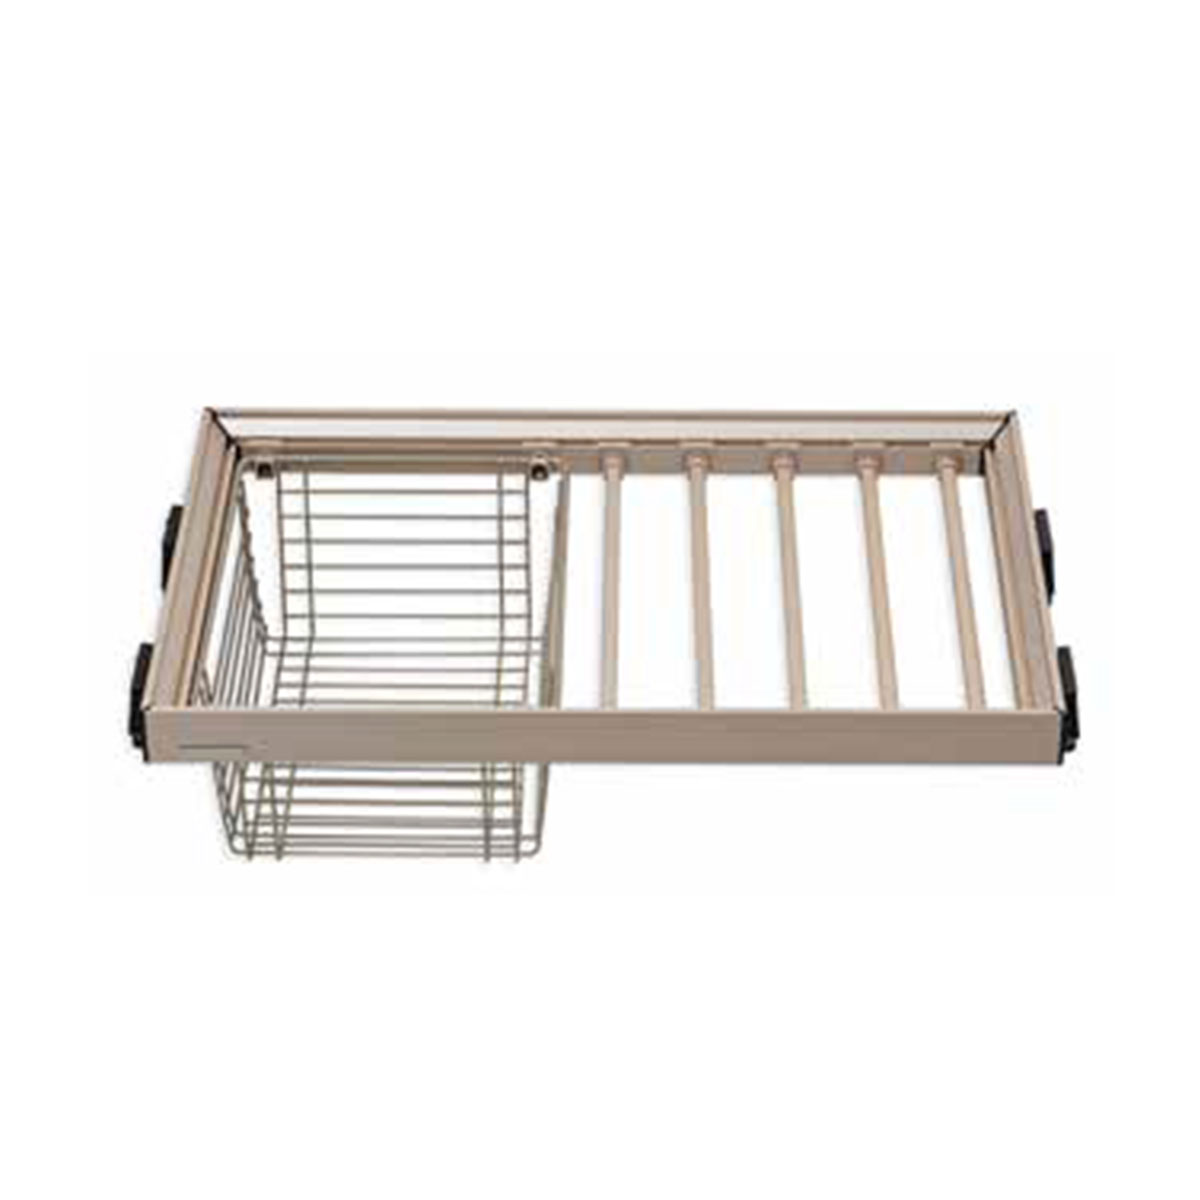 Trousers rack with storage basket 